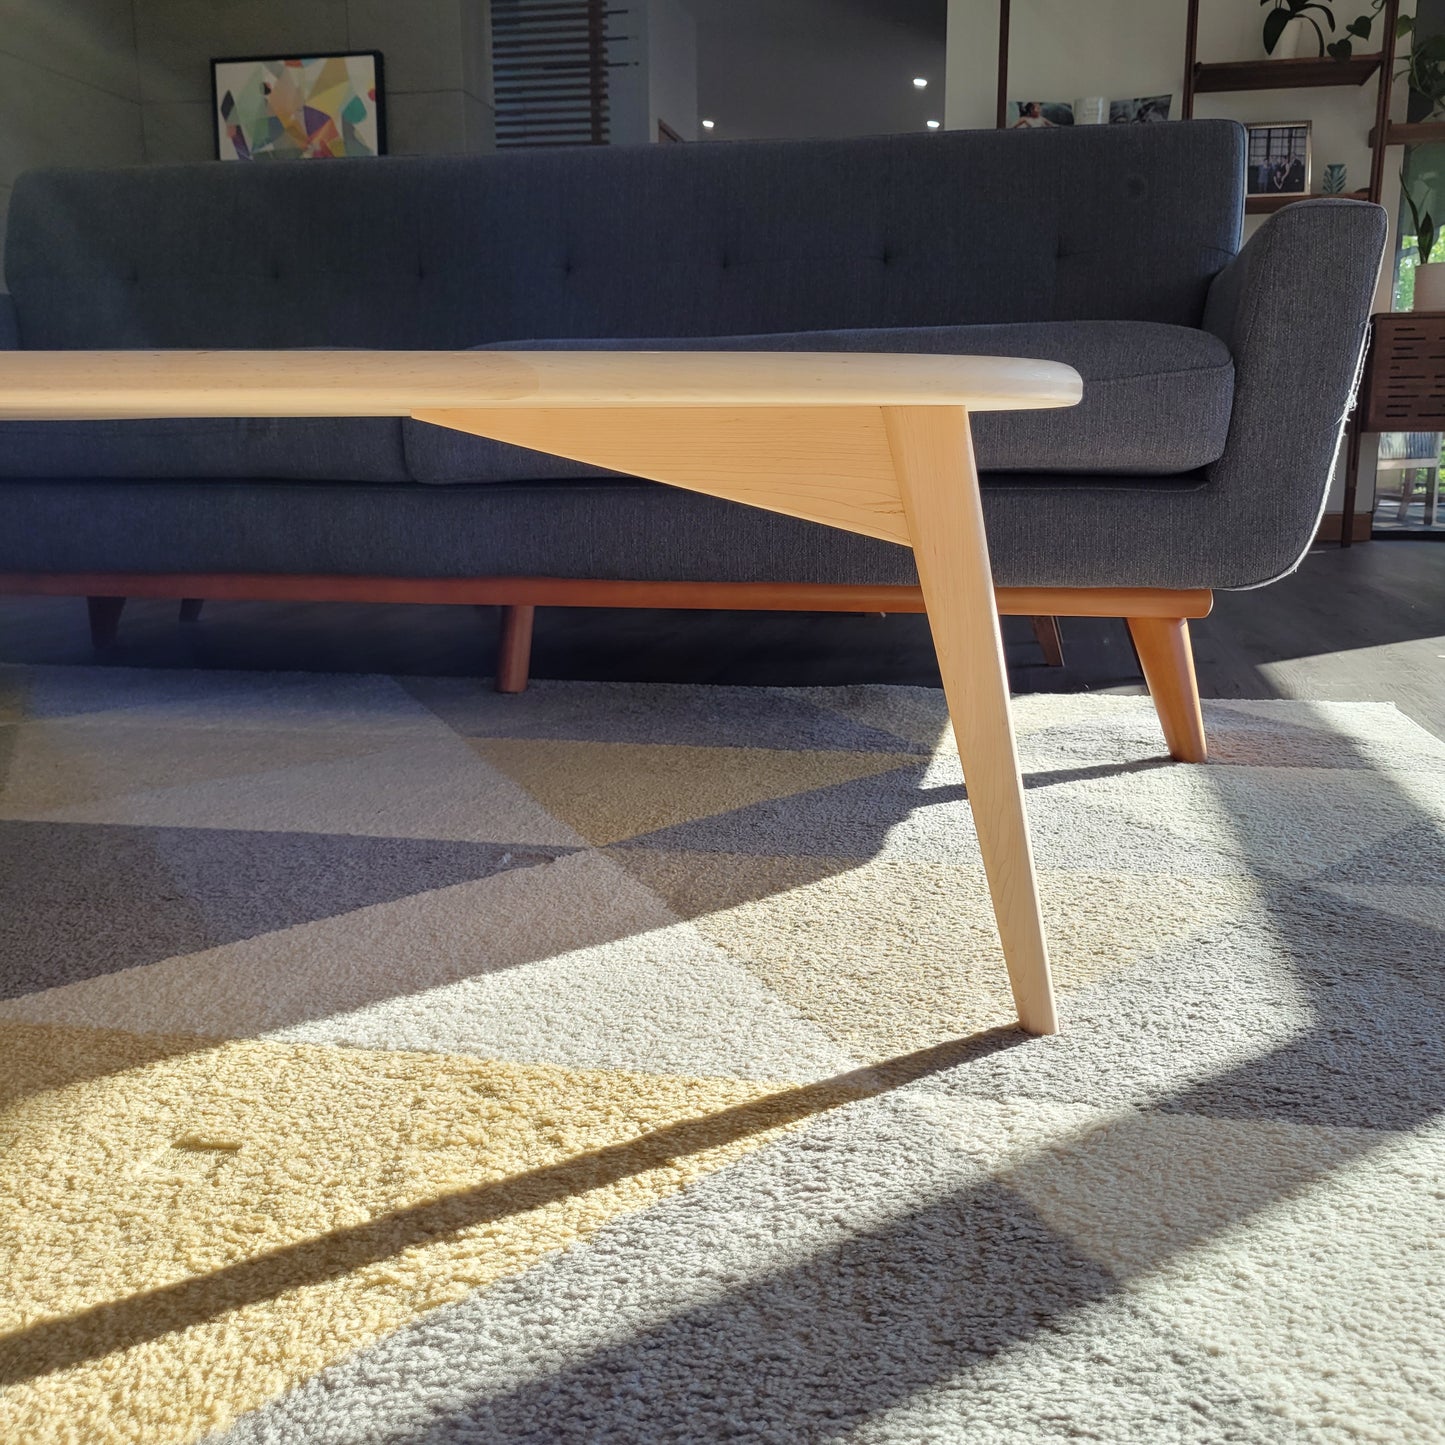 Tapered Coffee Table Legs